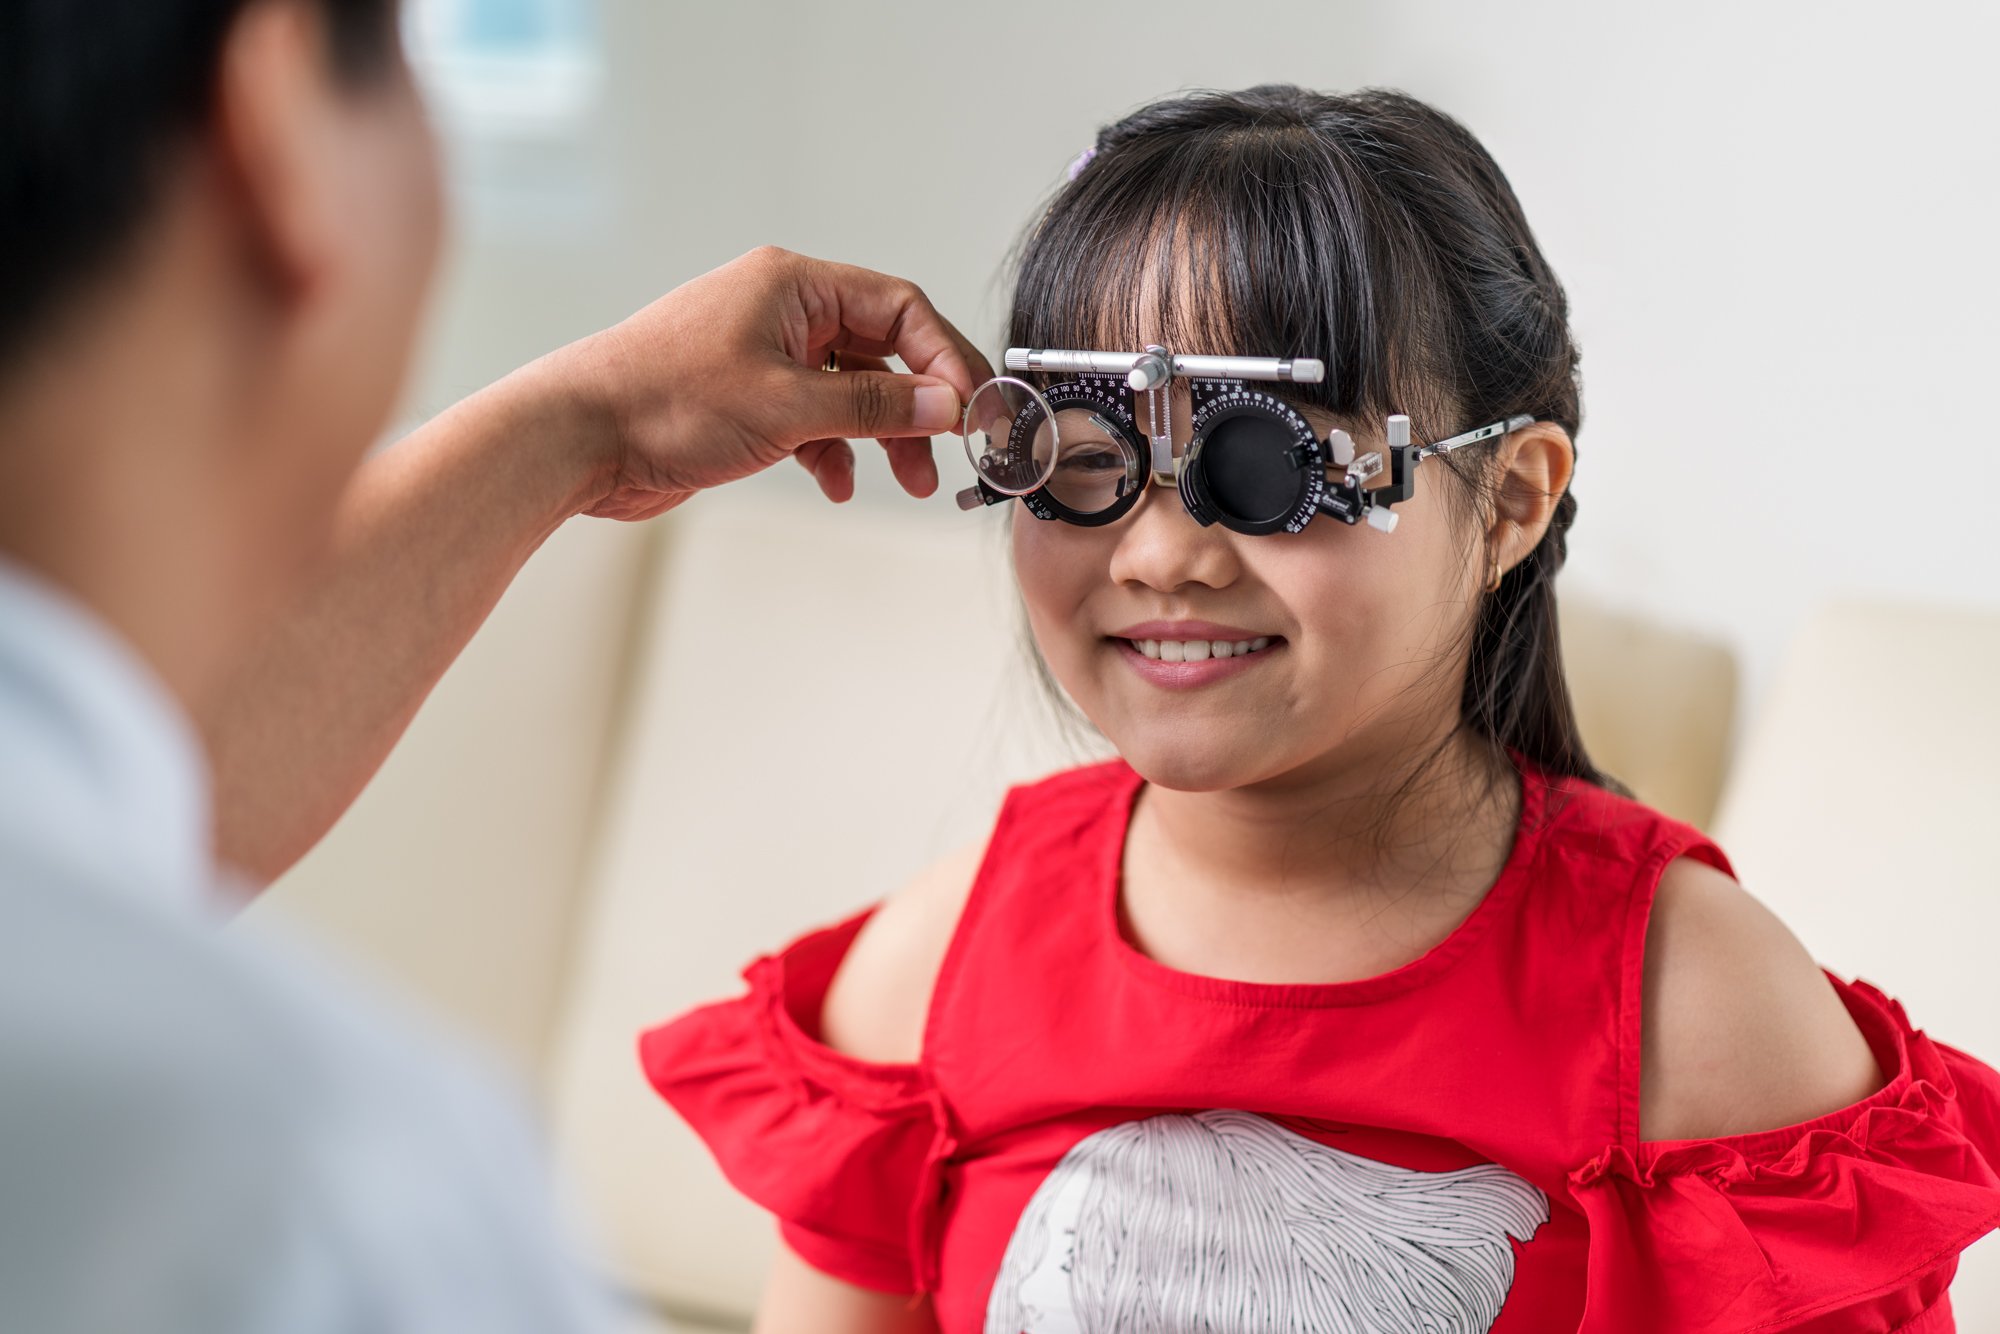 A Dr performs a Paediatric eye exam on young child at Hoan My Eye Hospital.